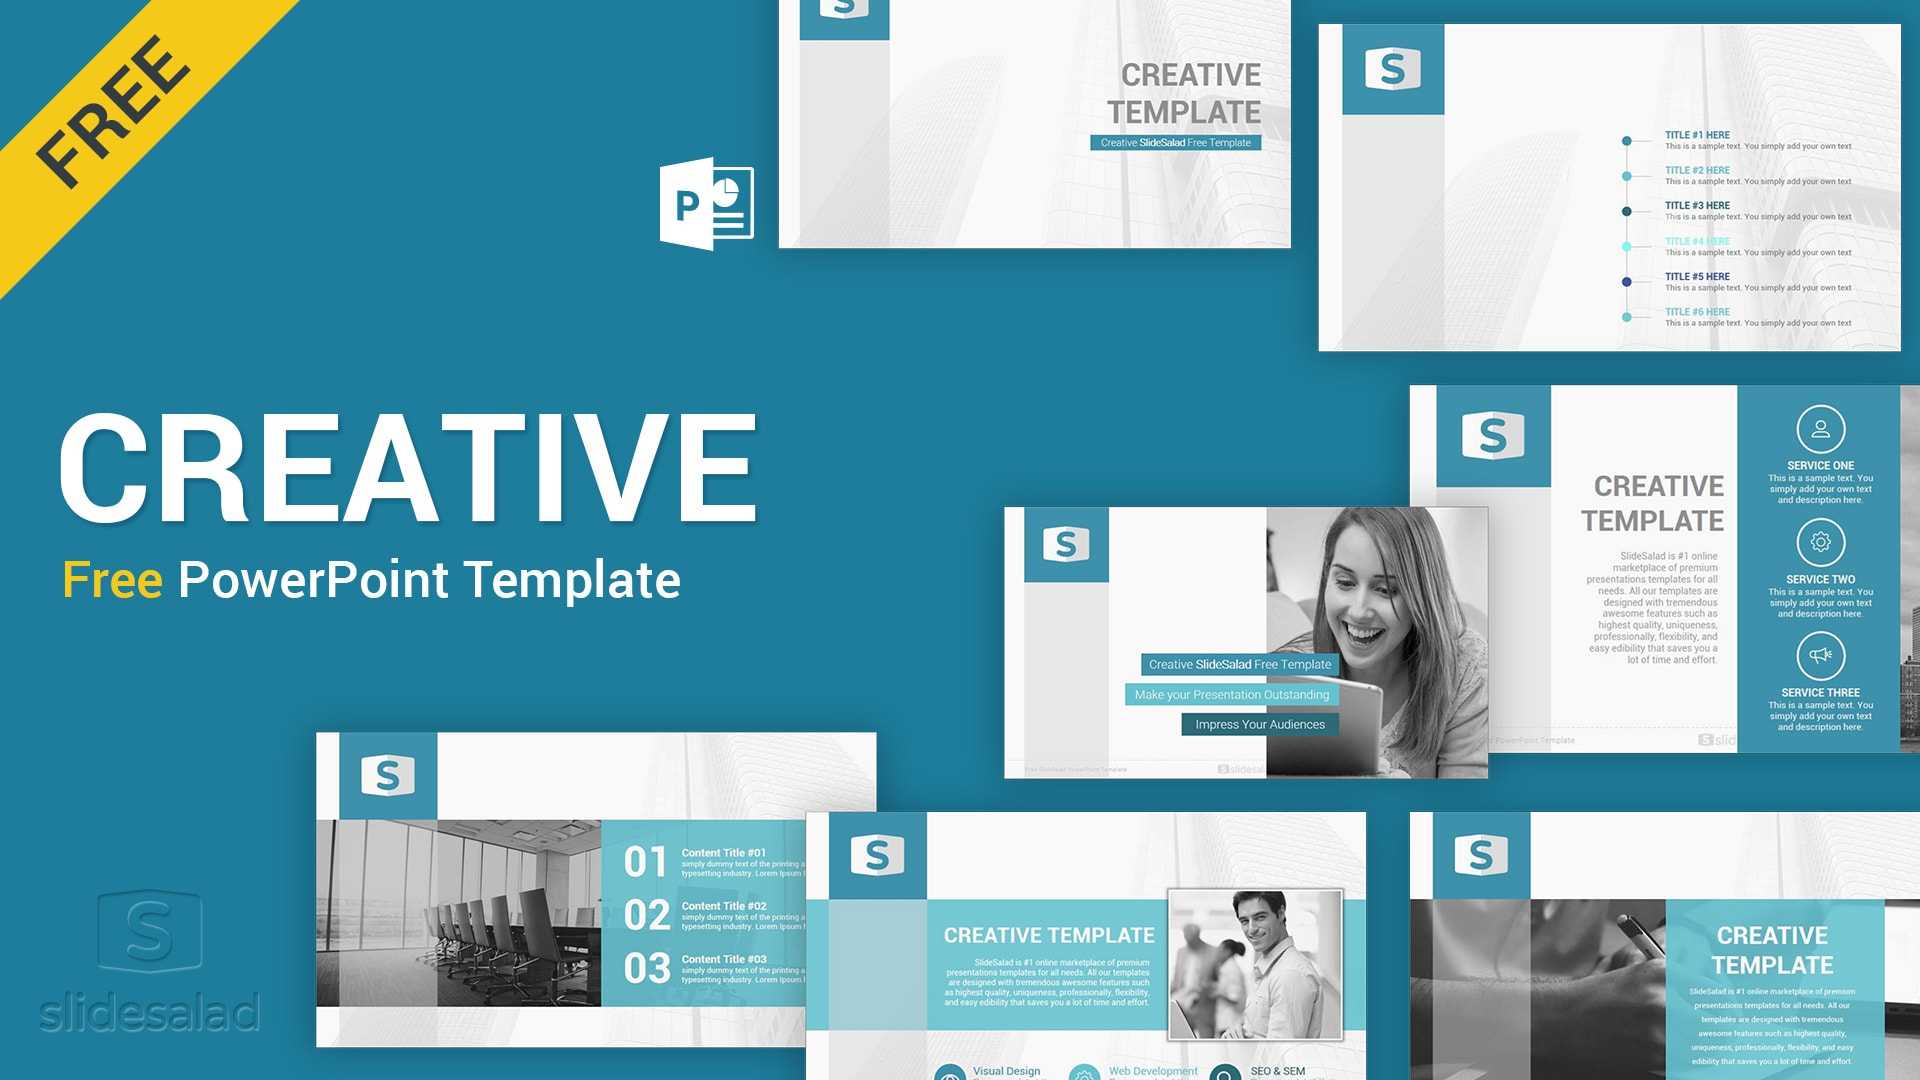 Creative Free Download Powerpoint Template – Slidesalad With Powerpoint Sample Templates Free Download